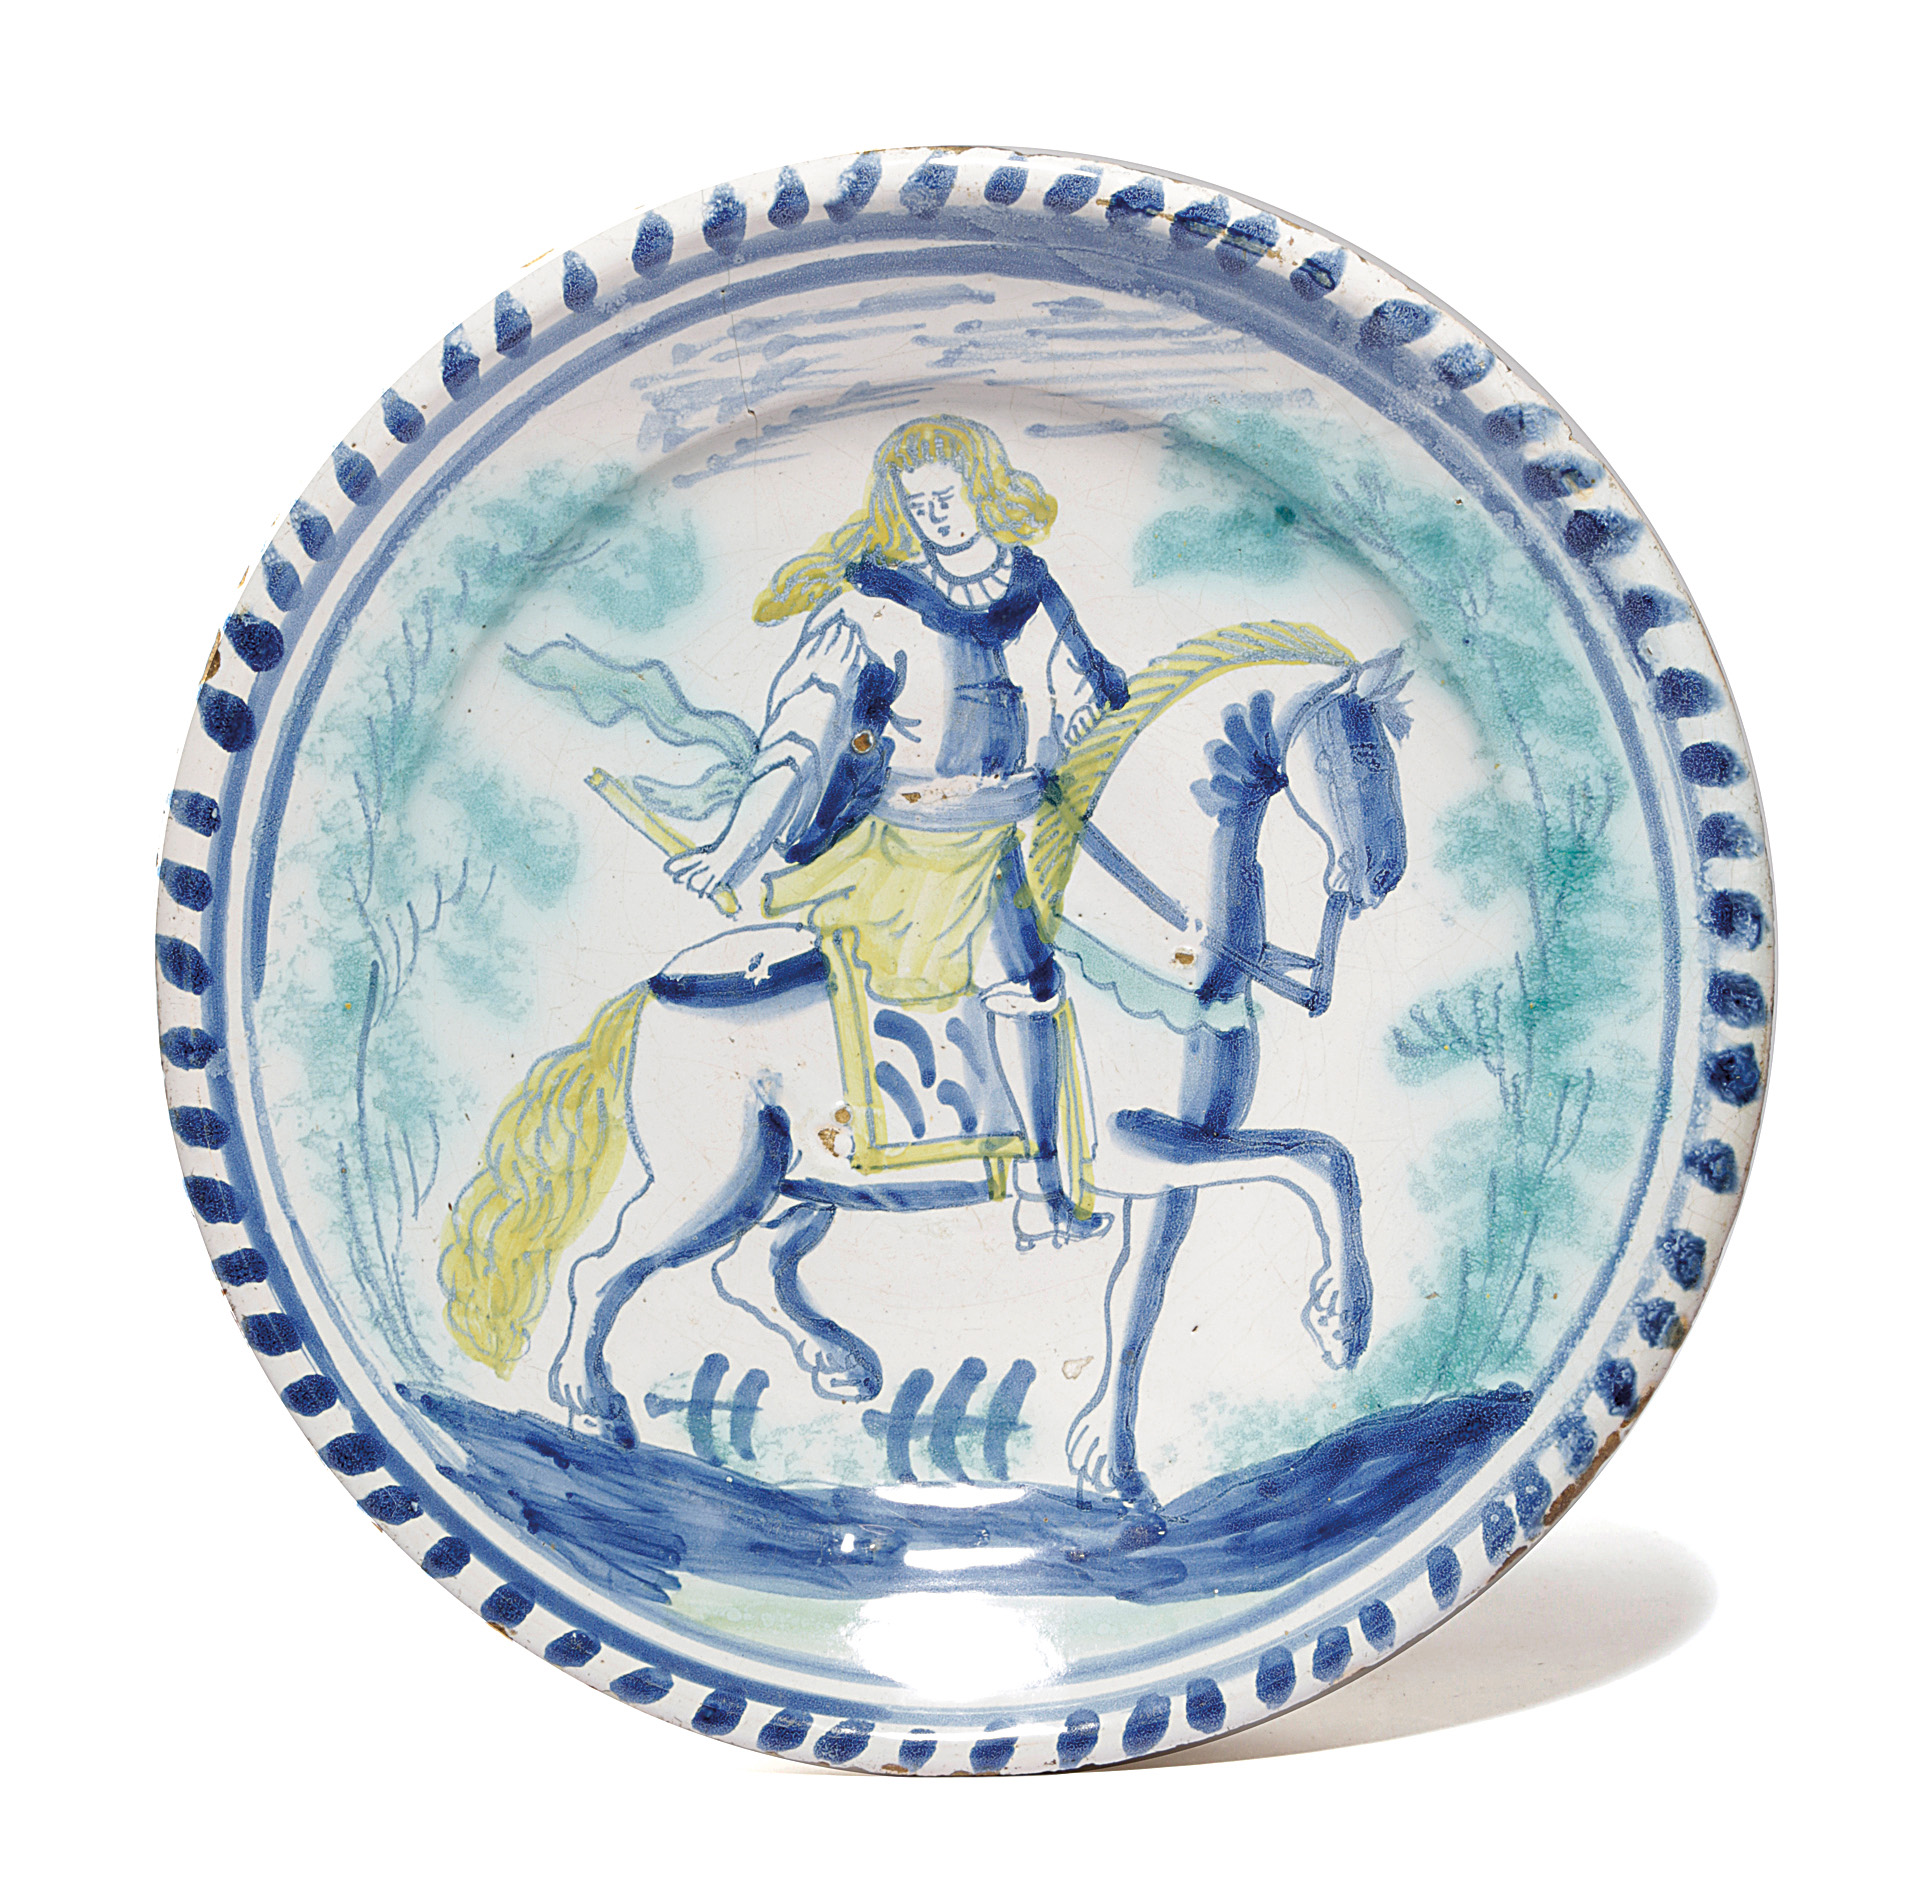 A DELFTWARE POTTERY EQUESTRIAN CHARGER PROBABLY LONDON, C.1700 painted in blue, green and yellow